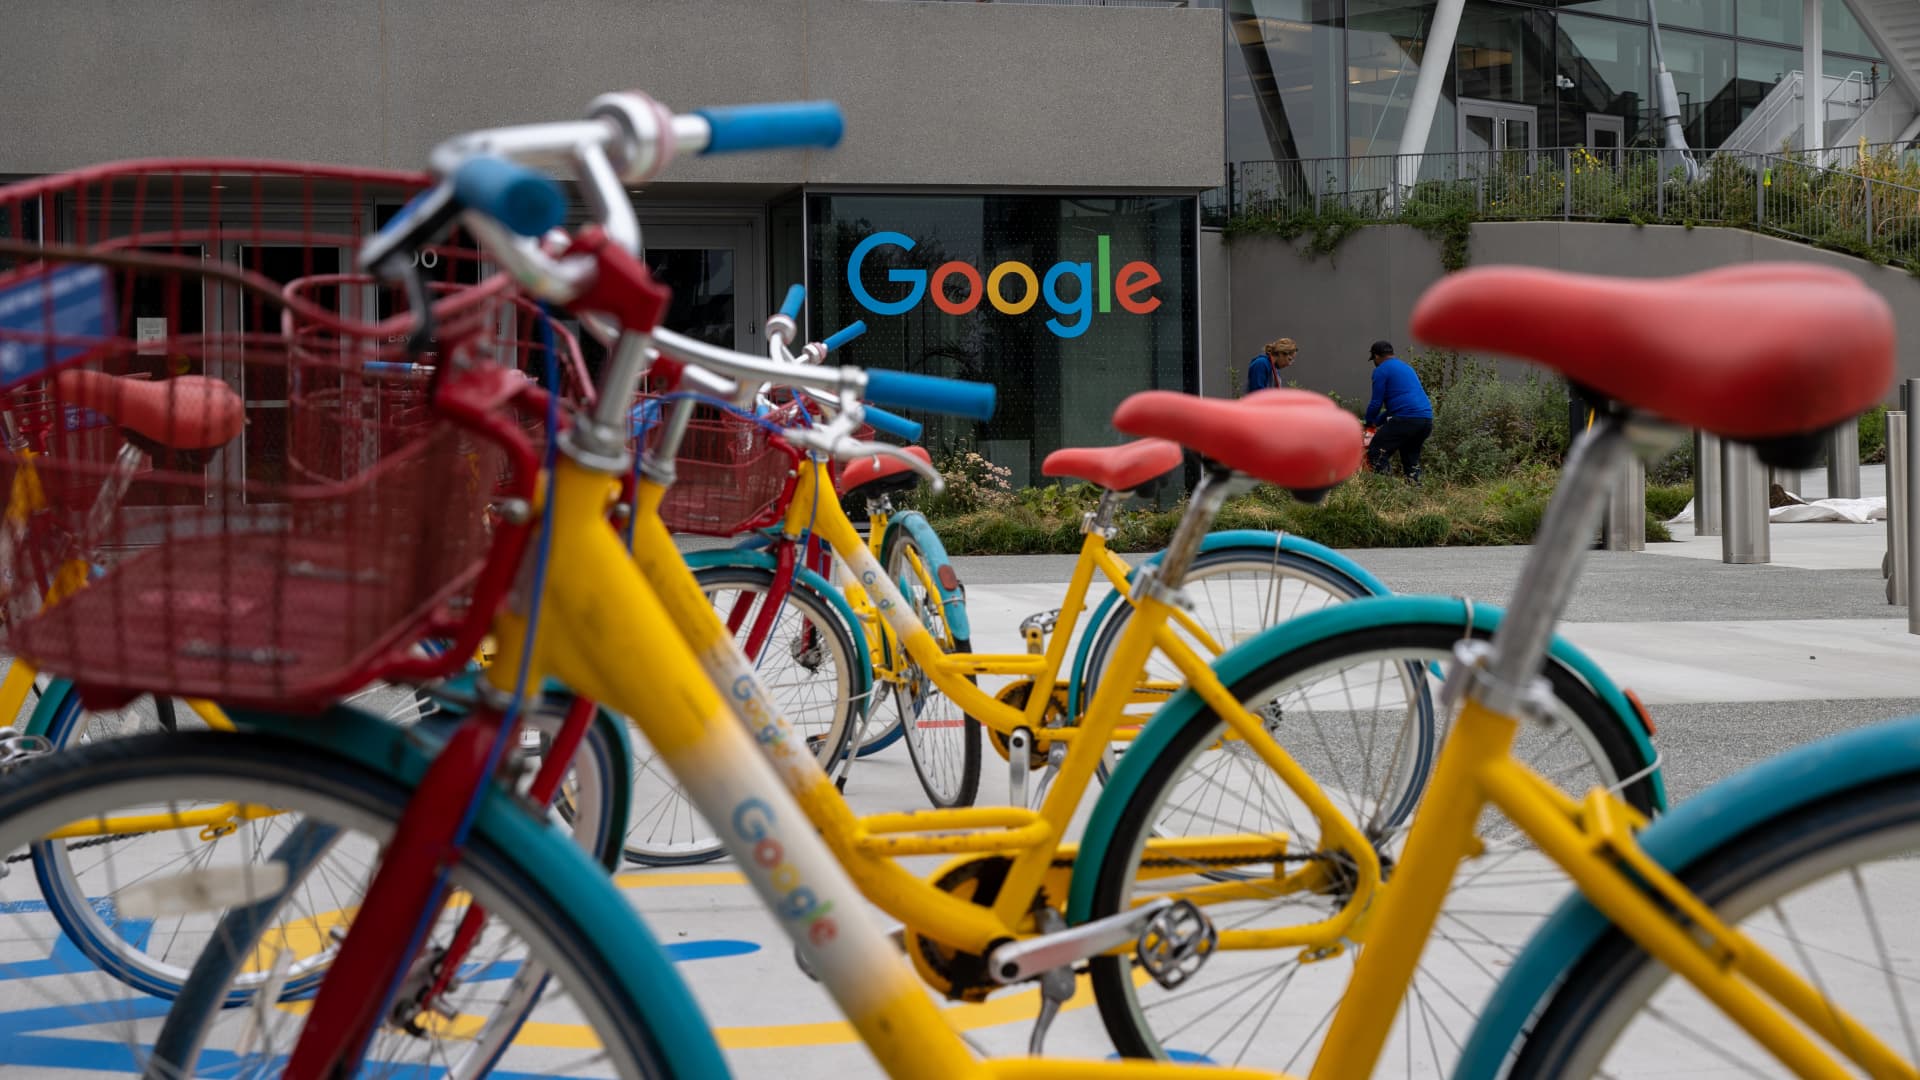 On Friday, Alphabet-owned Google announced it was cutting 12,000 employees, roughly 6% of the full-time workforce. According to filings released by t